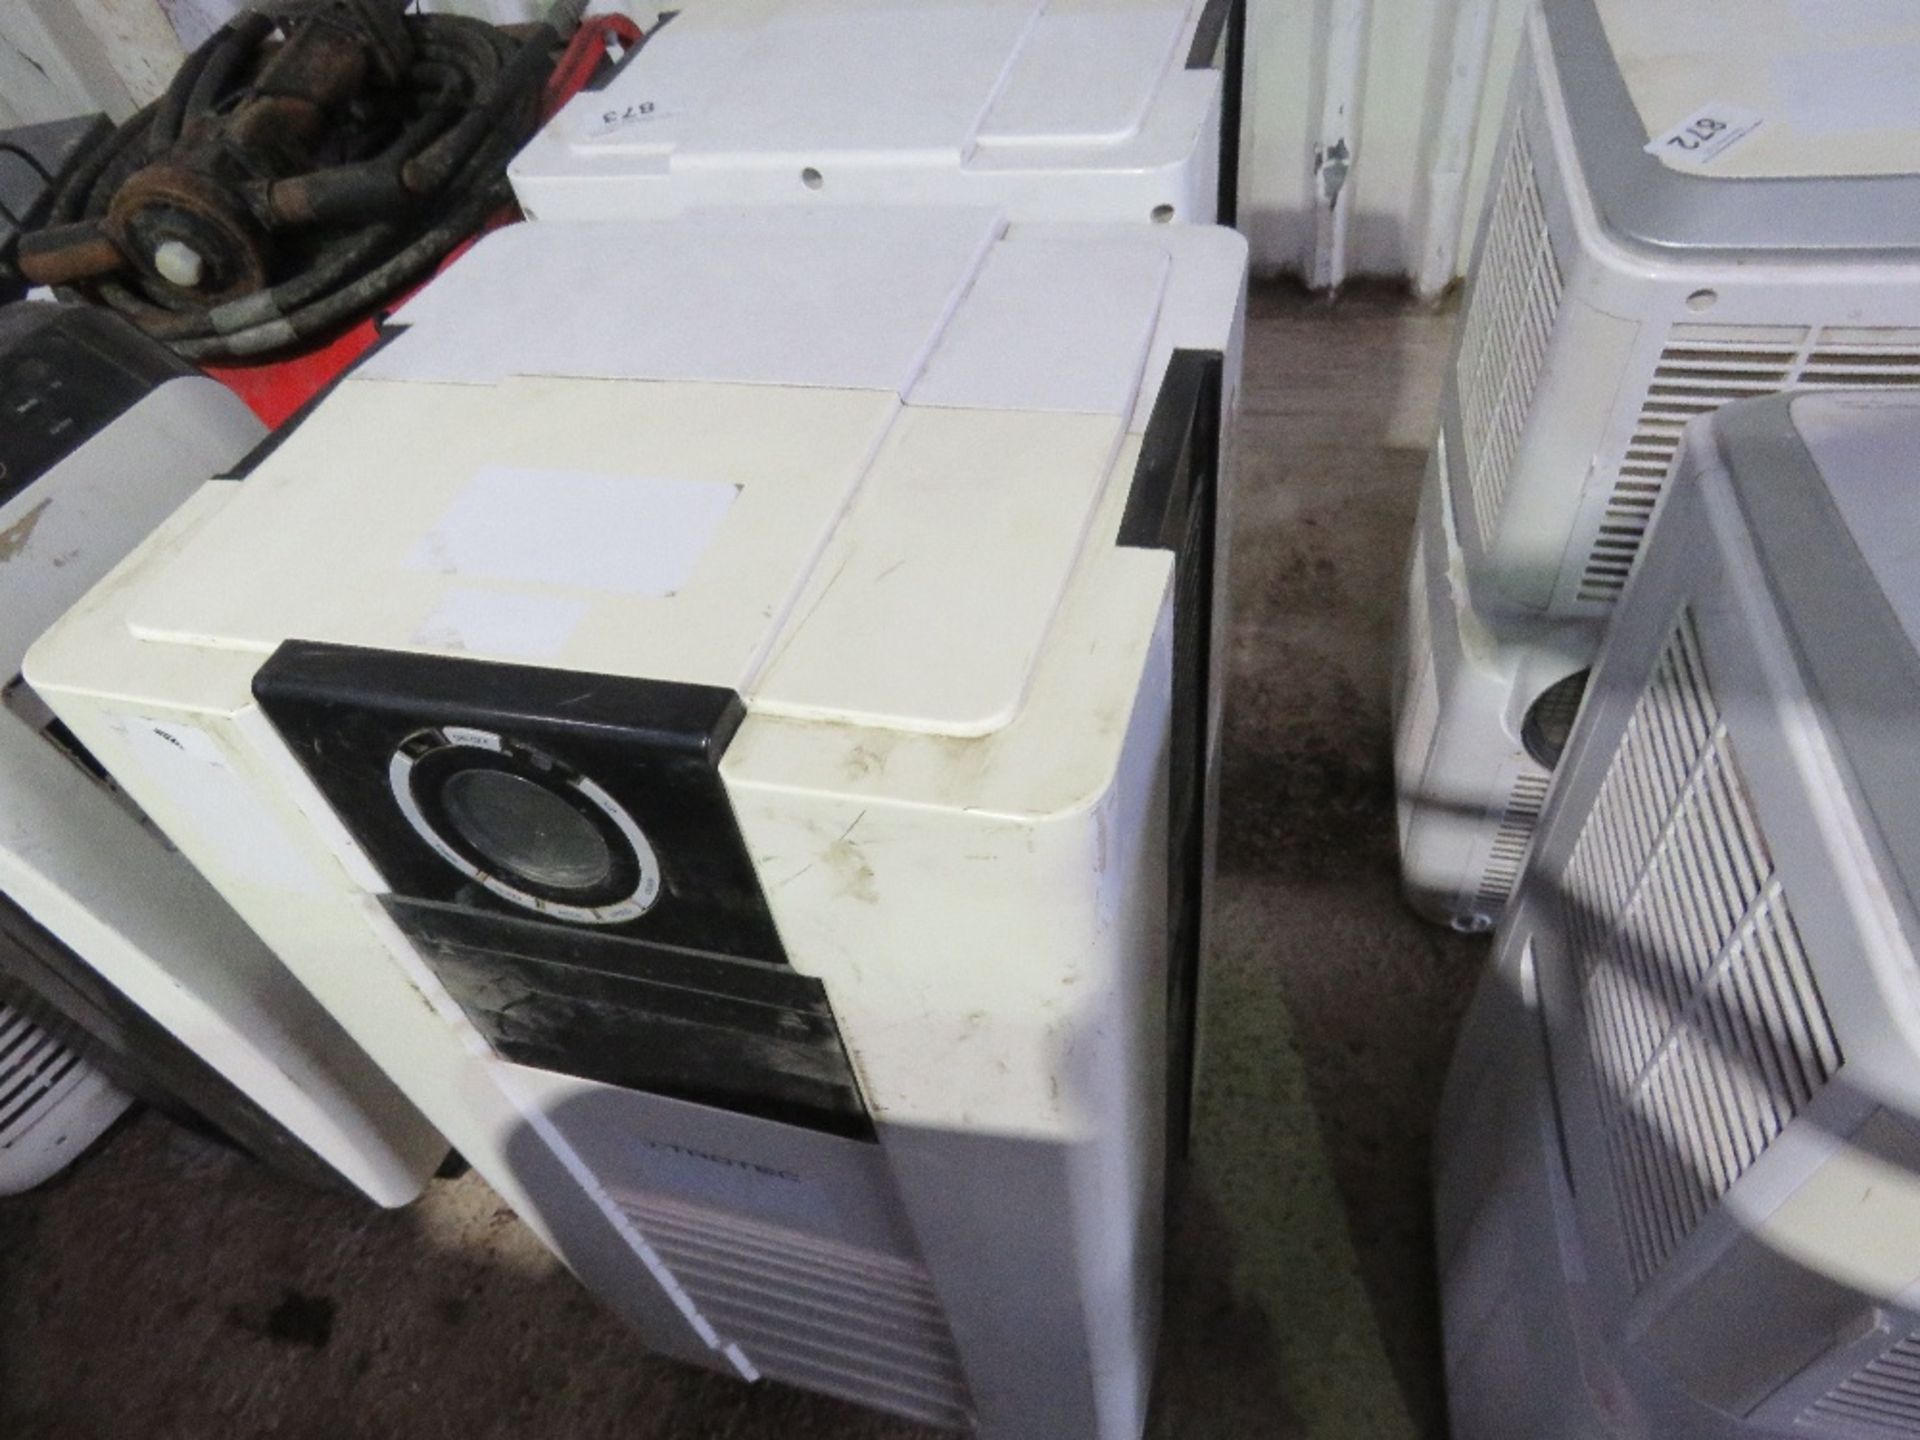 2 X ROOM AIR CONDITIONERS, 240VOLT POWERED. - Image 3 of 3